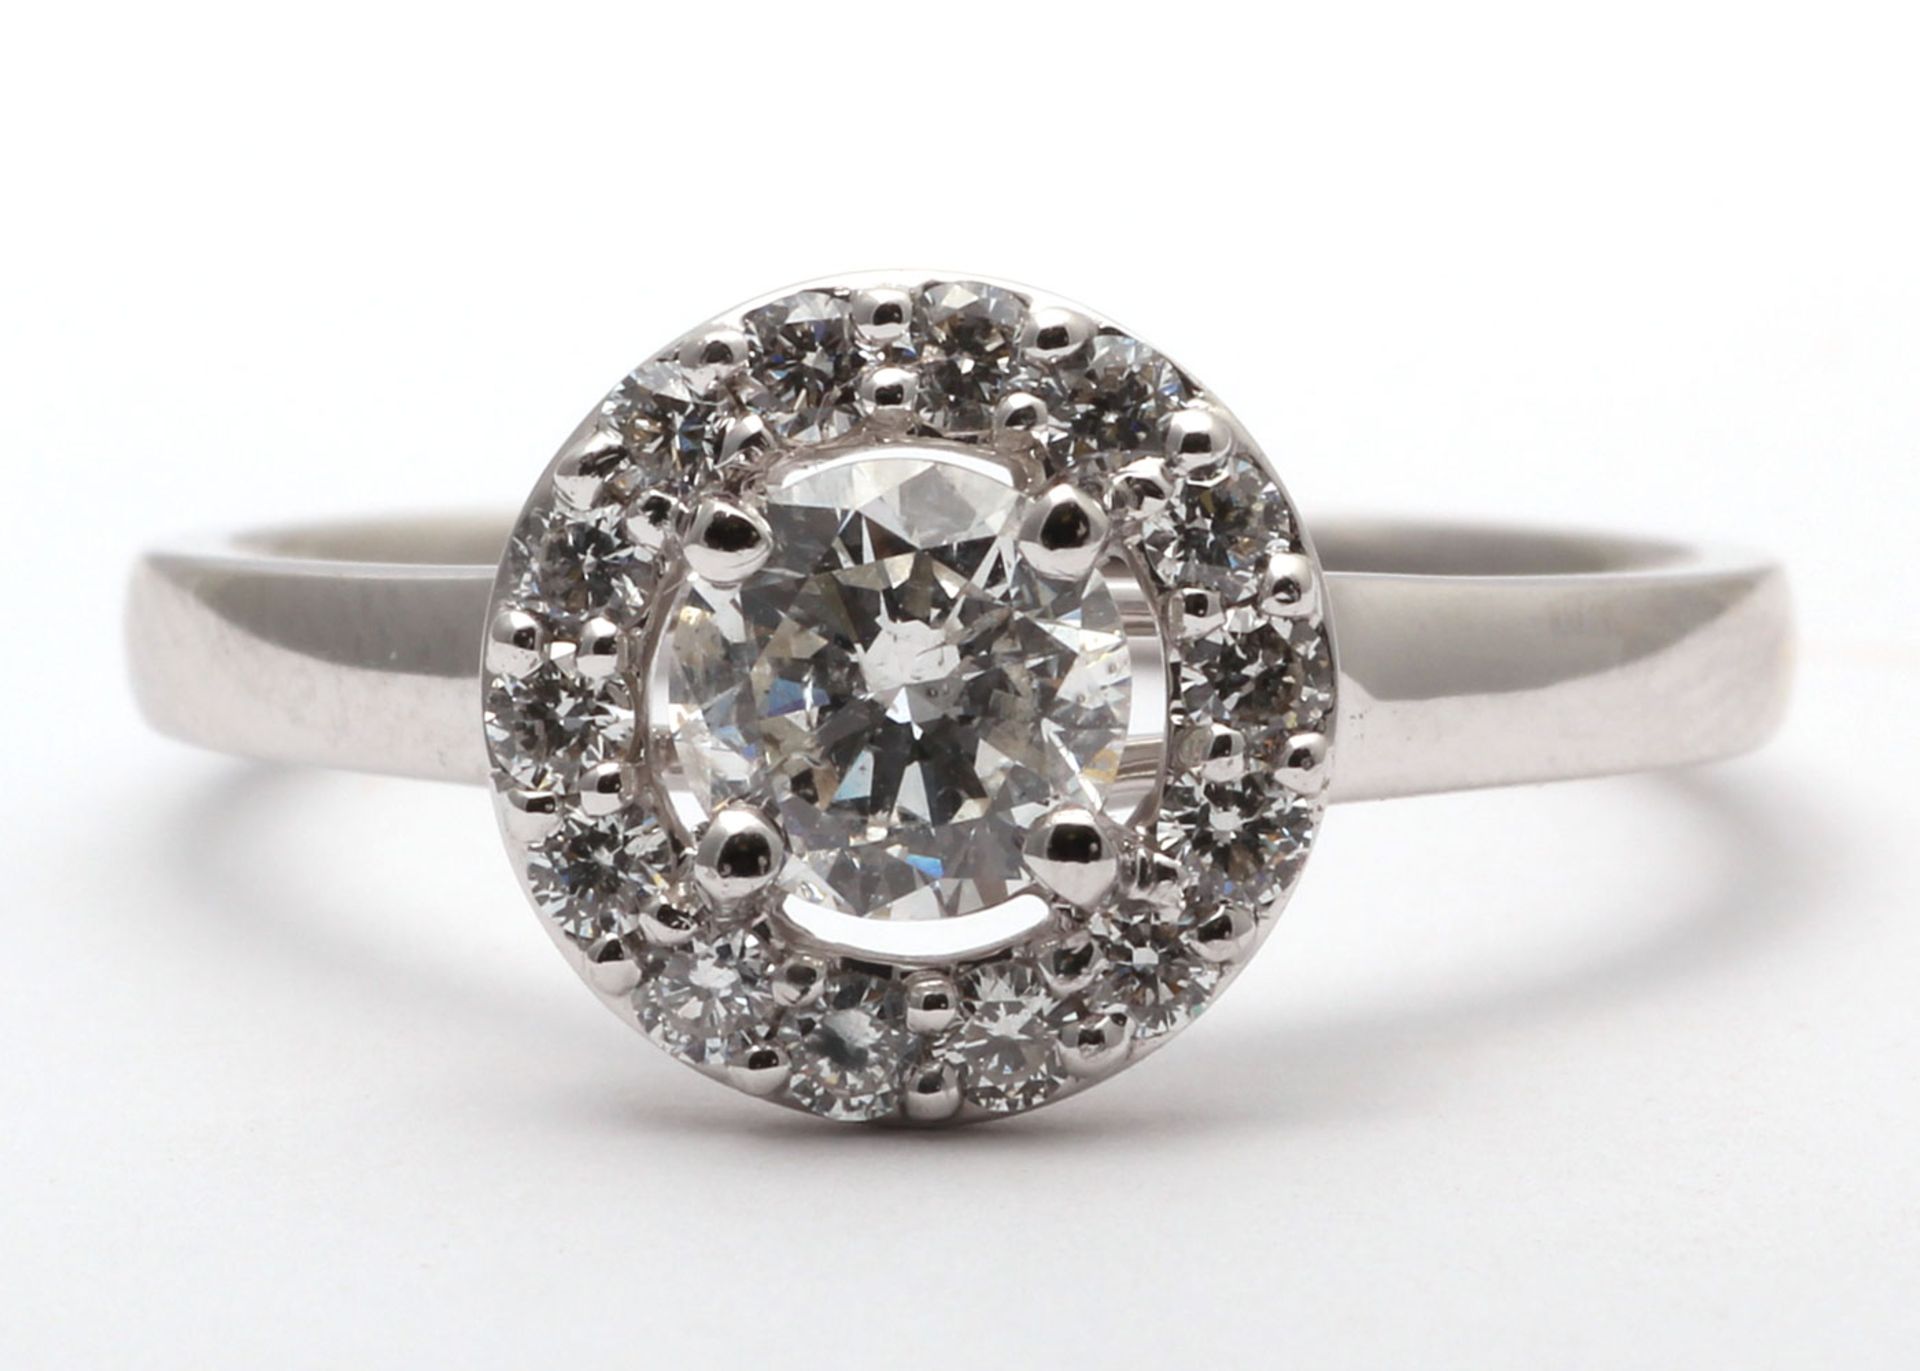 18ct White Gold Single Stone With Halo Setting Ring (0.58) 0.86 Carats - Valued by GIE £10,925. - Image 8 of 9